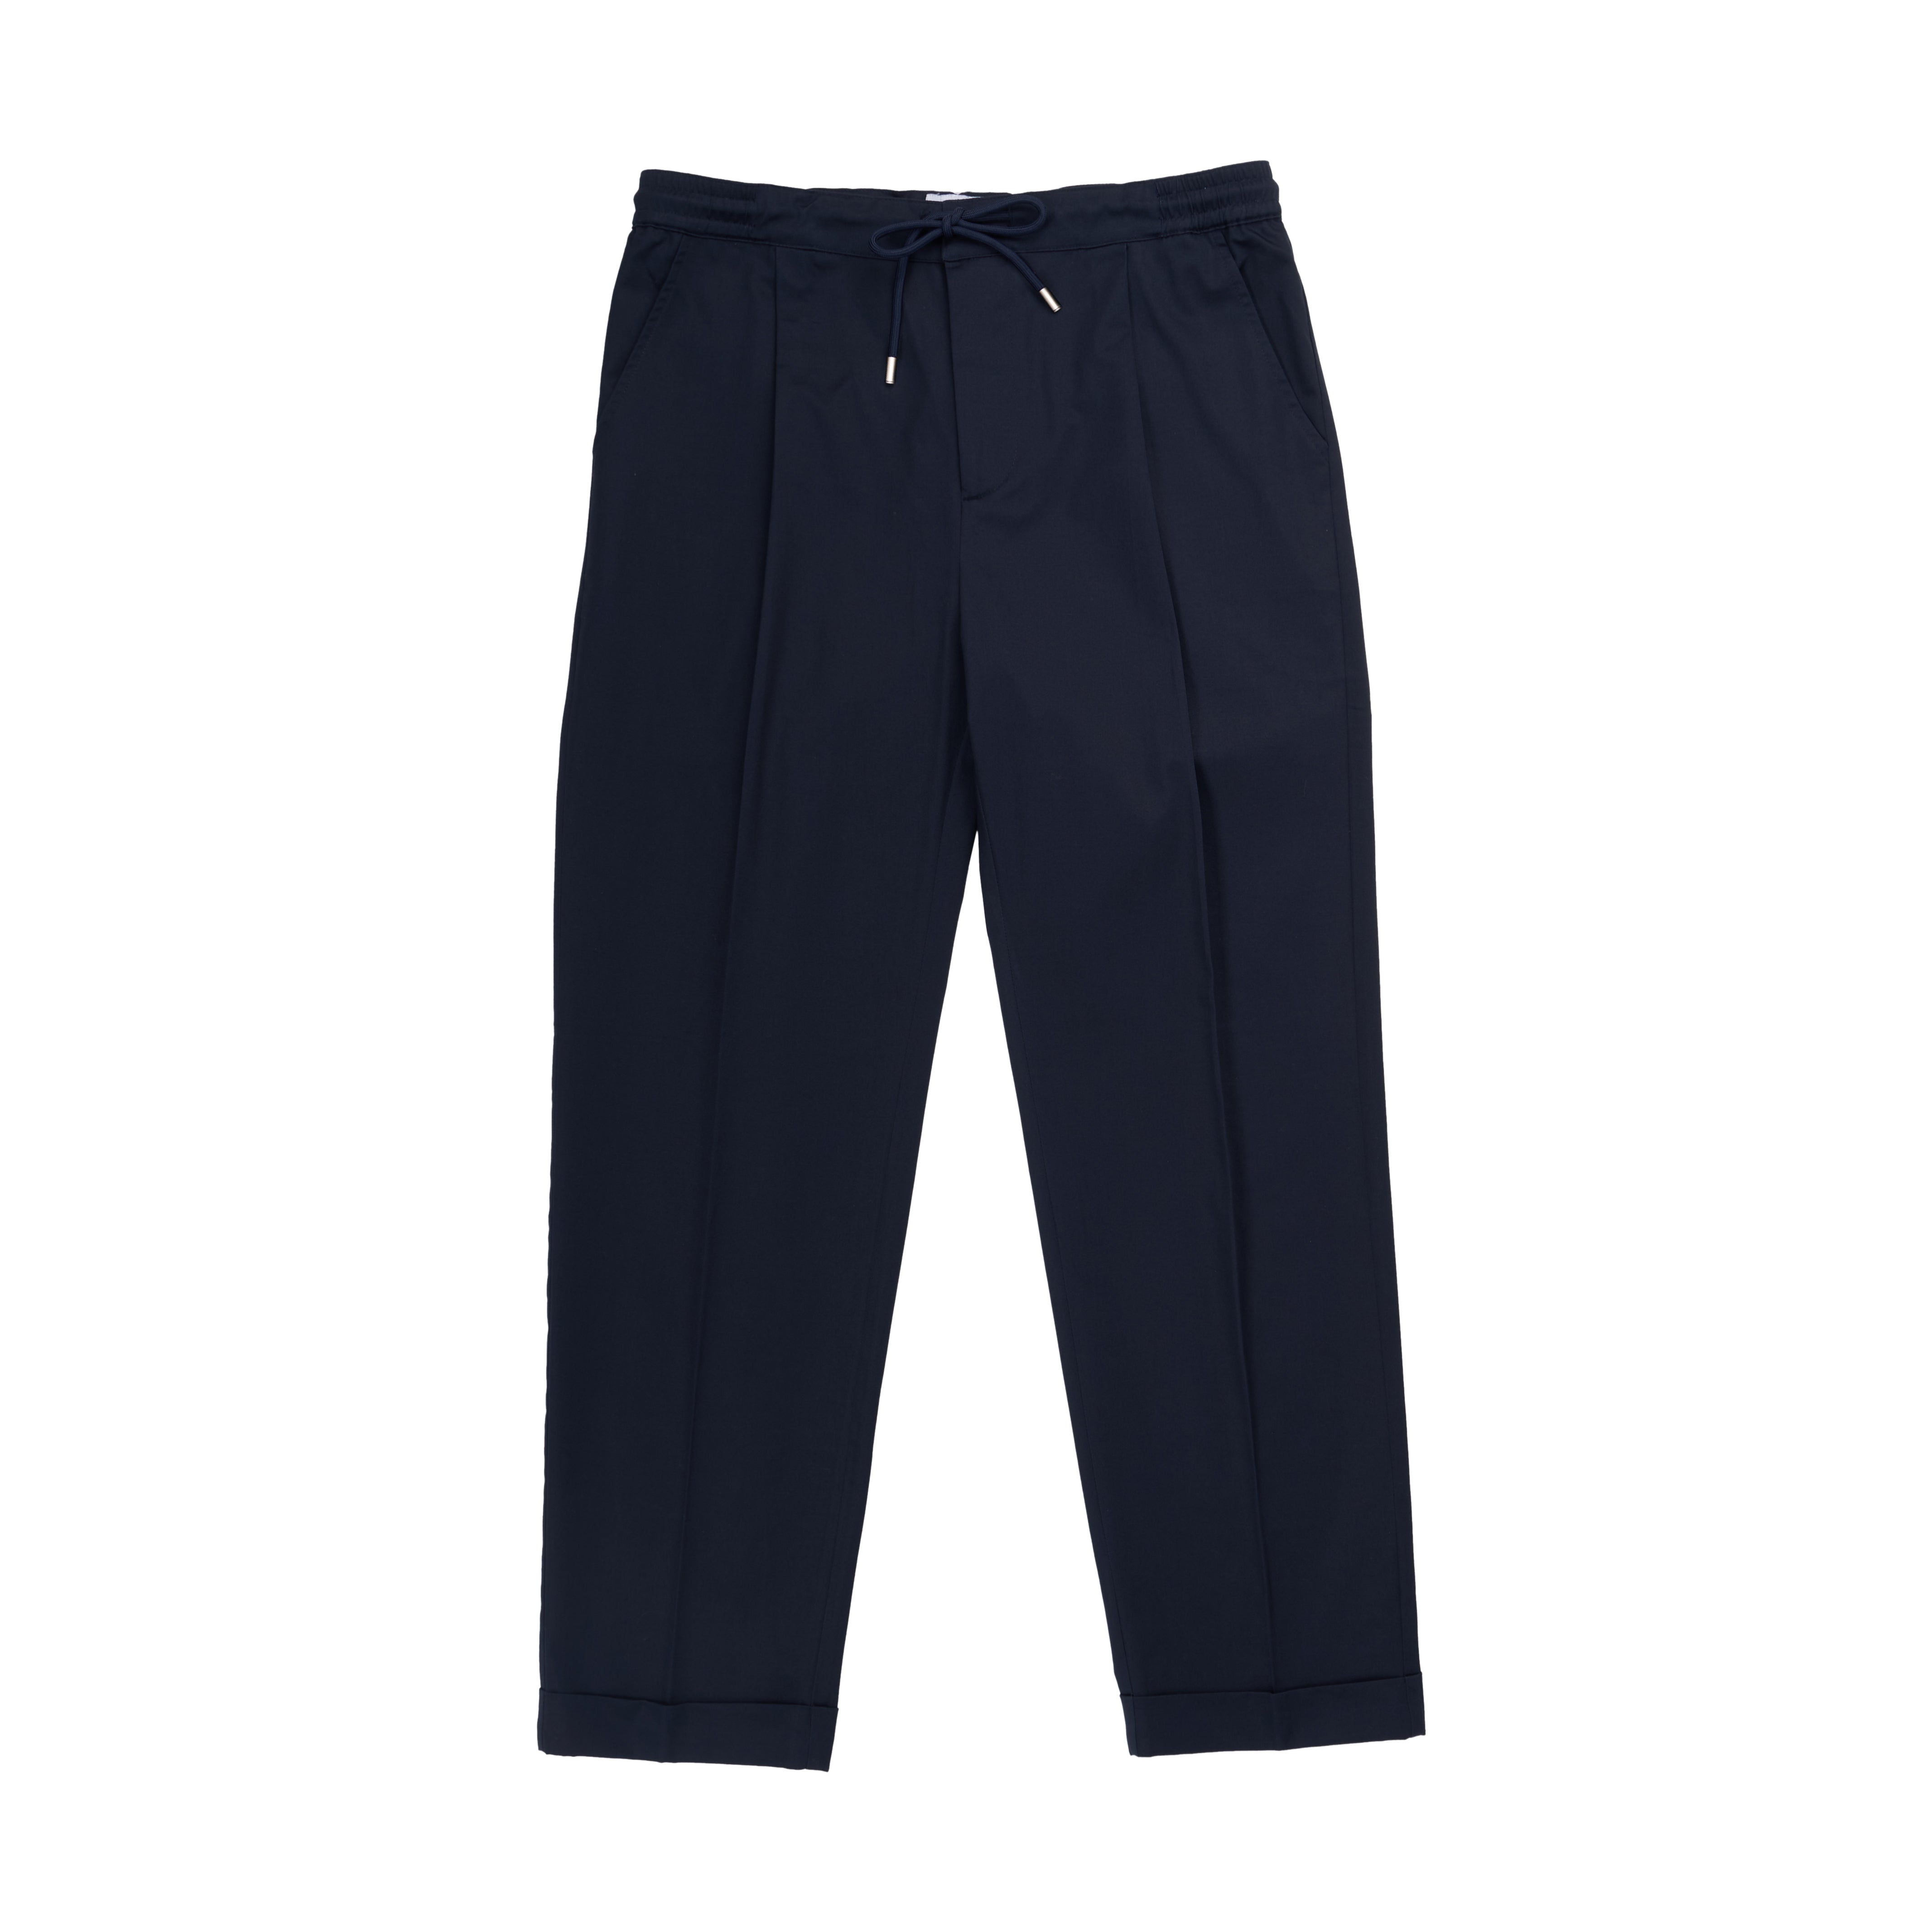 Drawstring Trousers in Navy Size 30